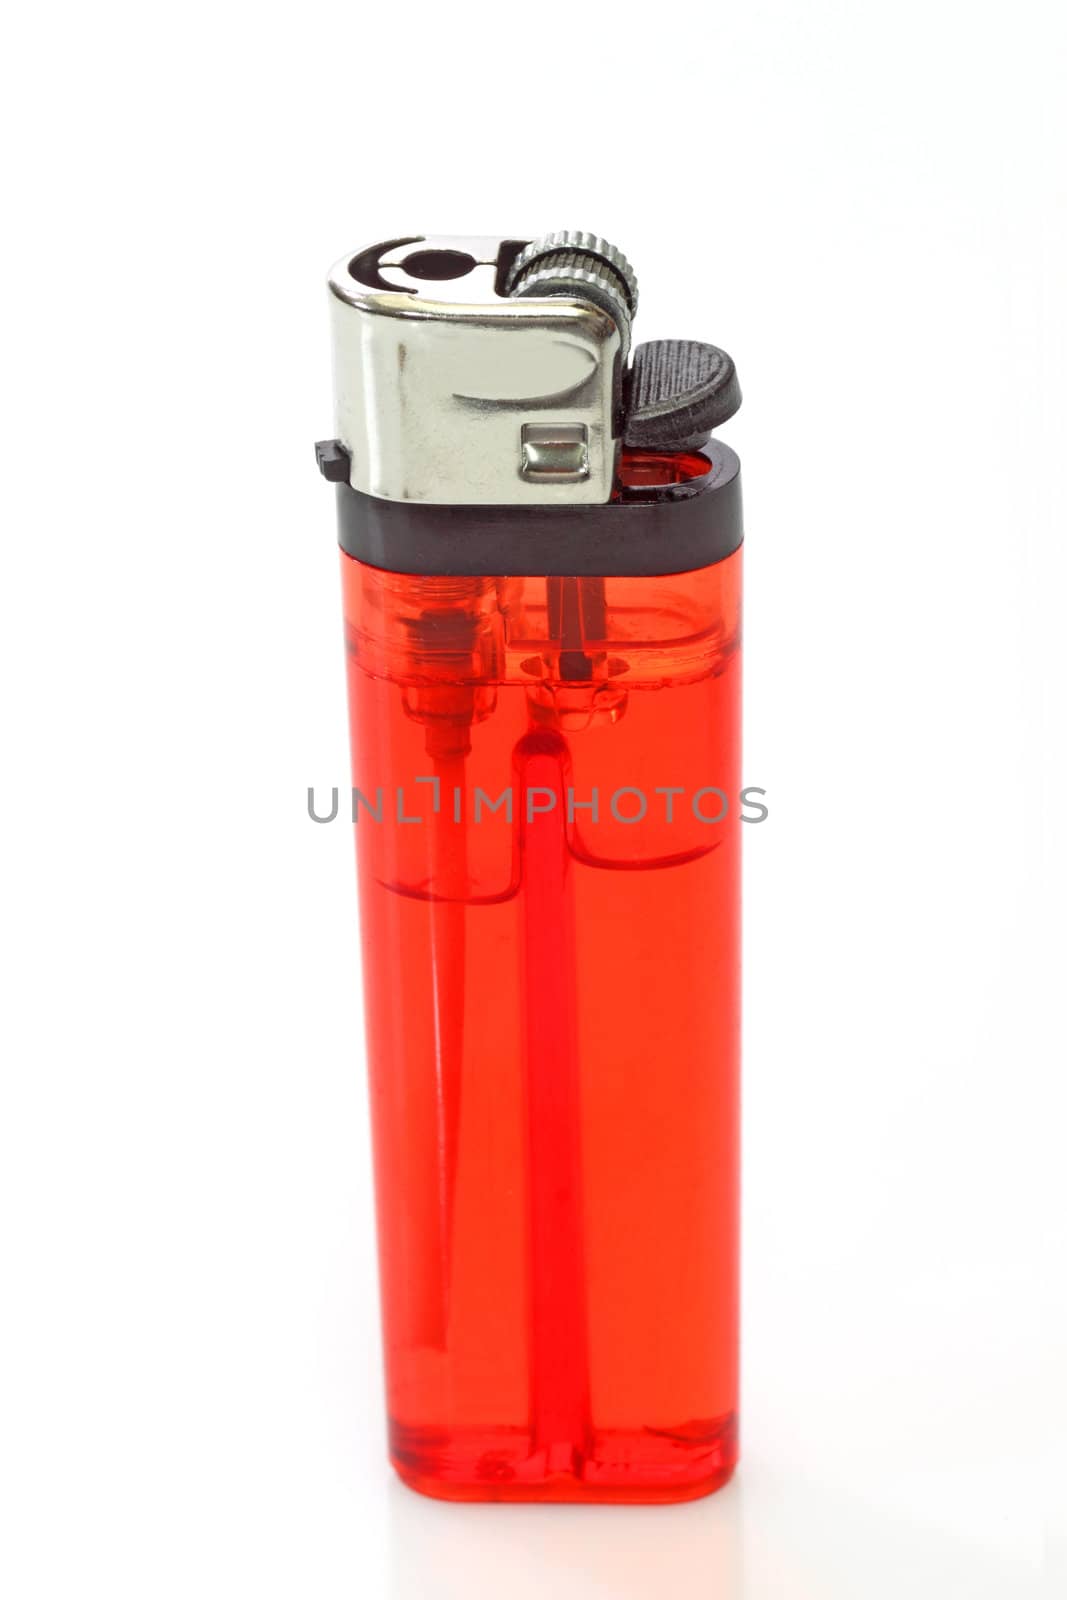 Red cigarette lighter, isolated over a white background.